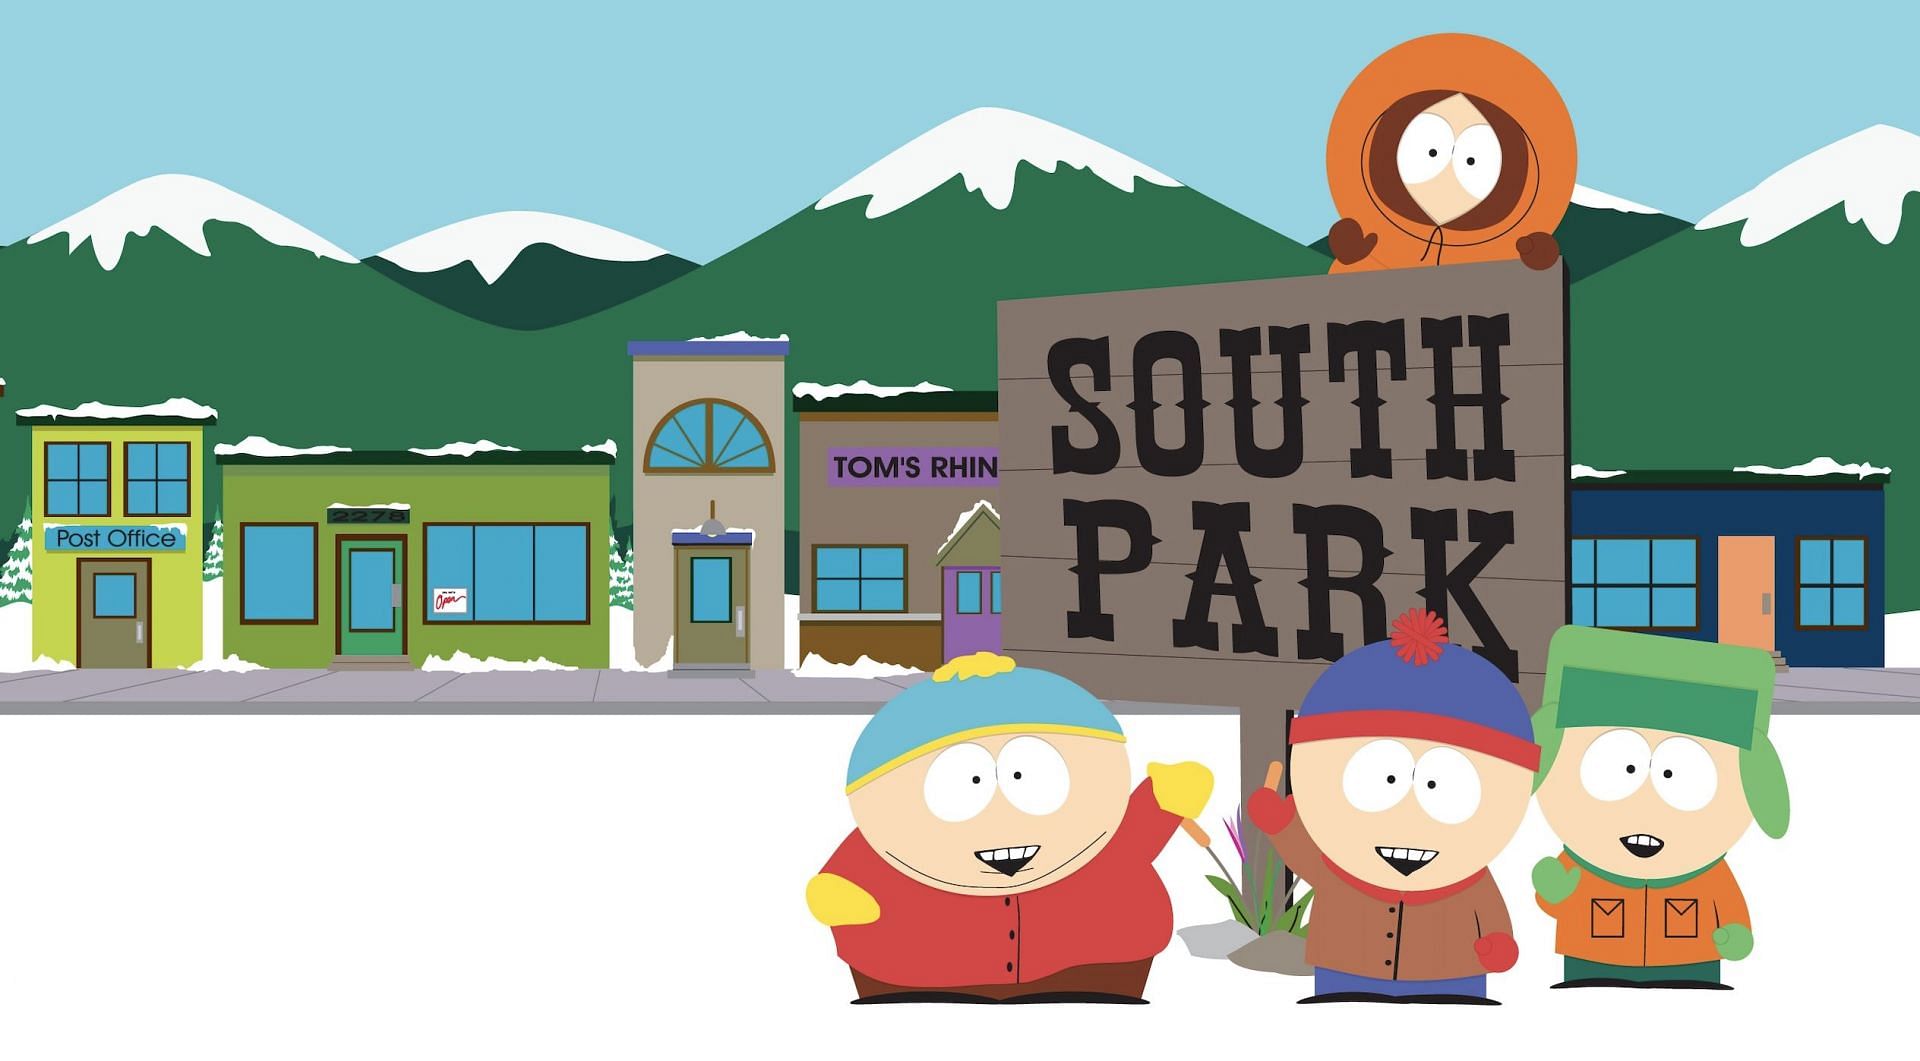 The Coon and Friends: A Look at South Park